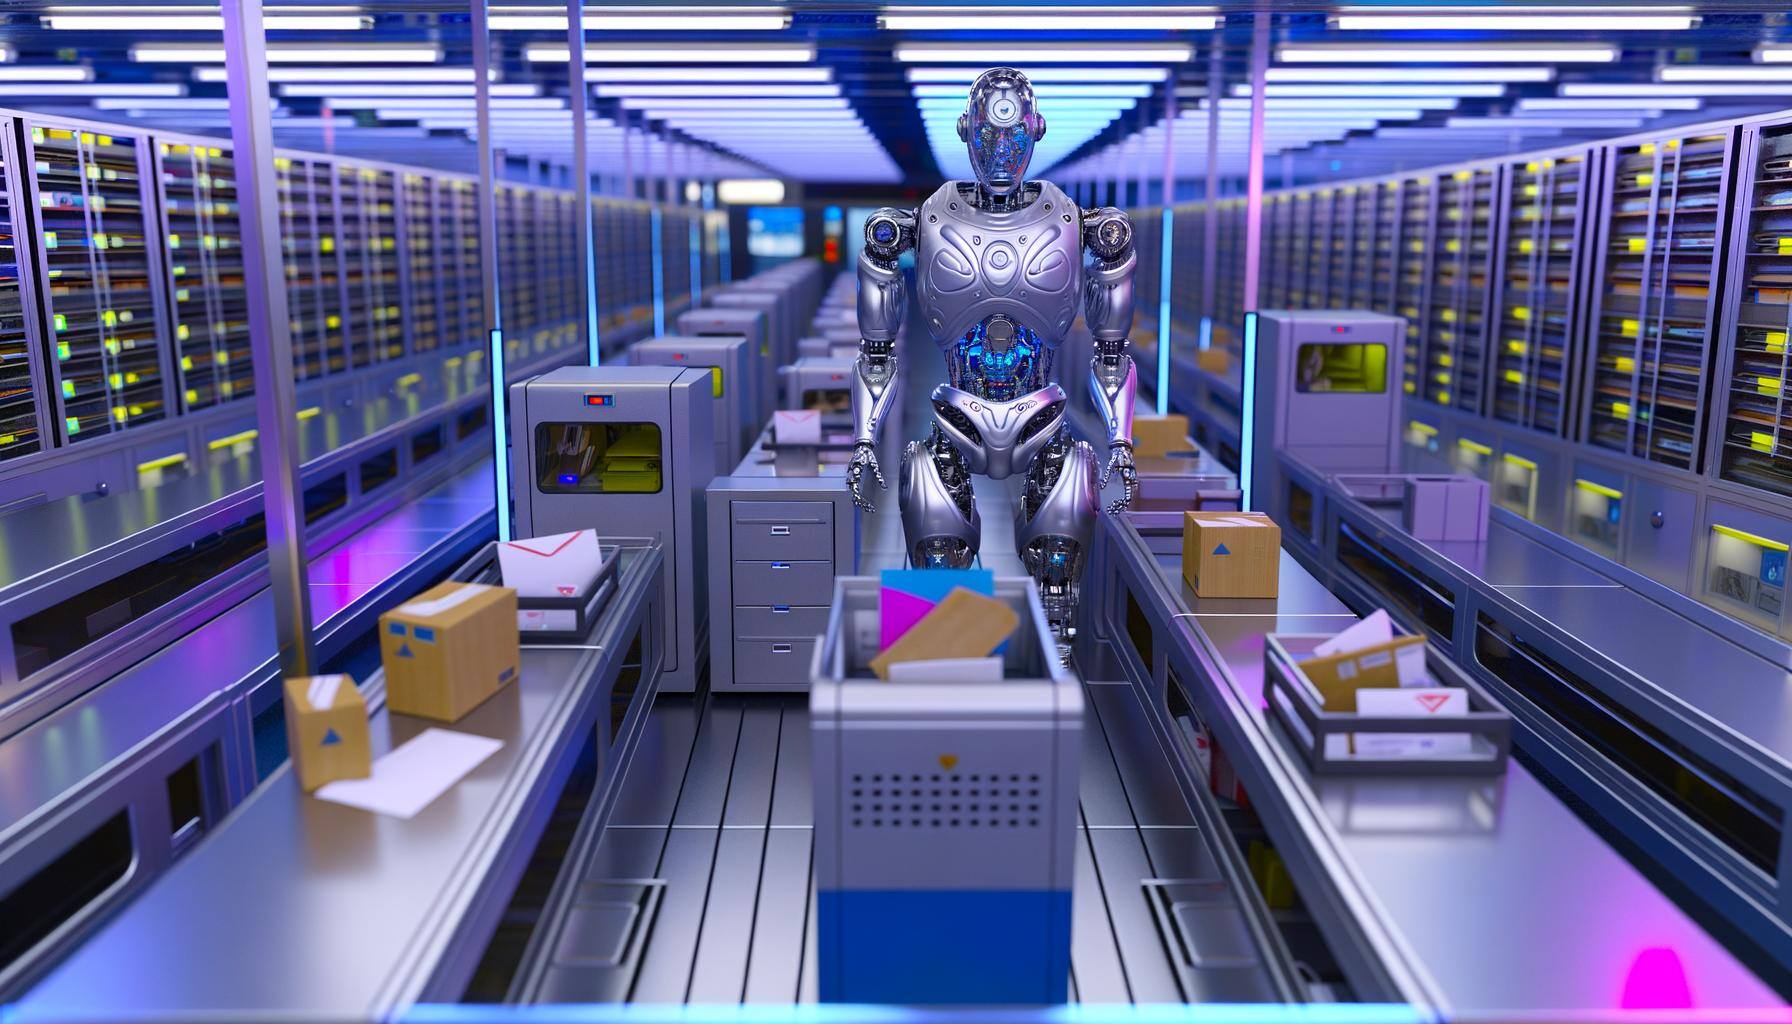 Robot as postal worker in post office, futuristic